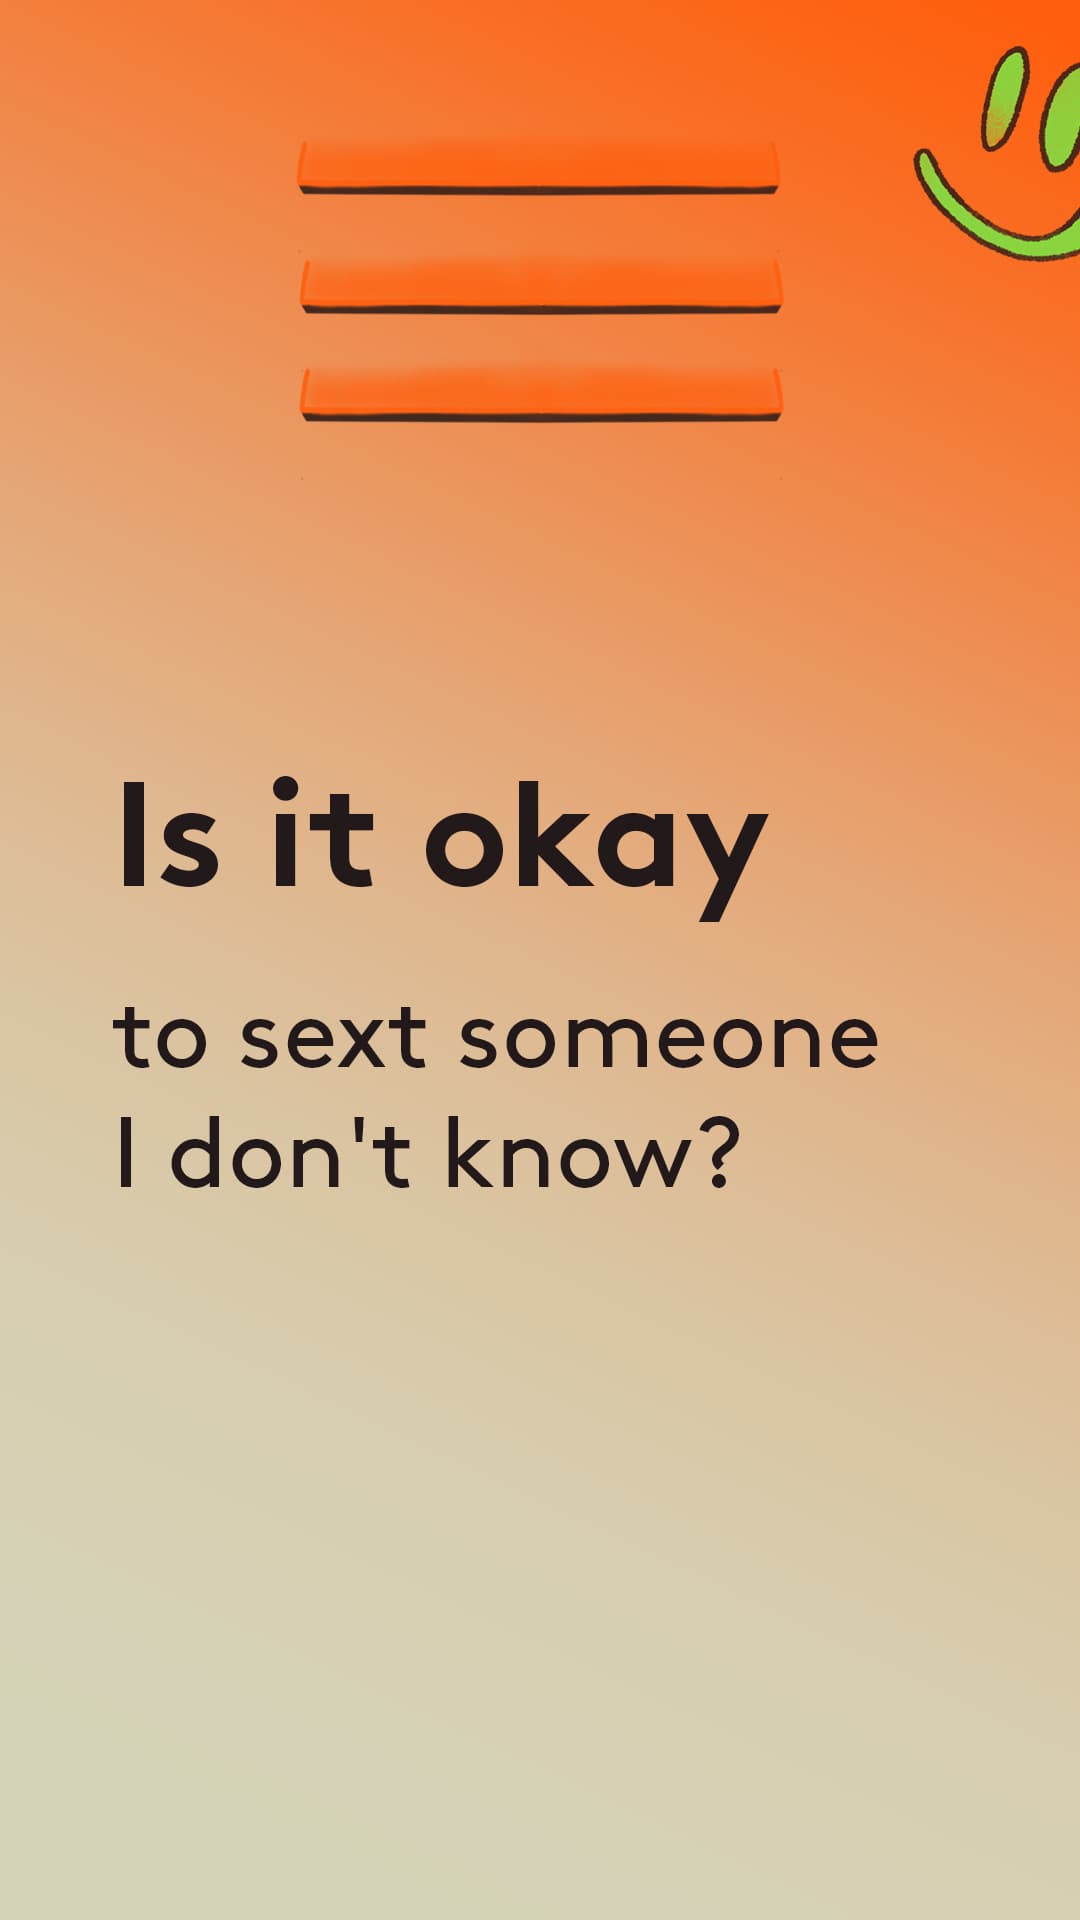 Is it okay to sext someone i dont know?